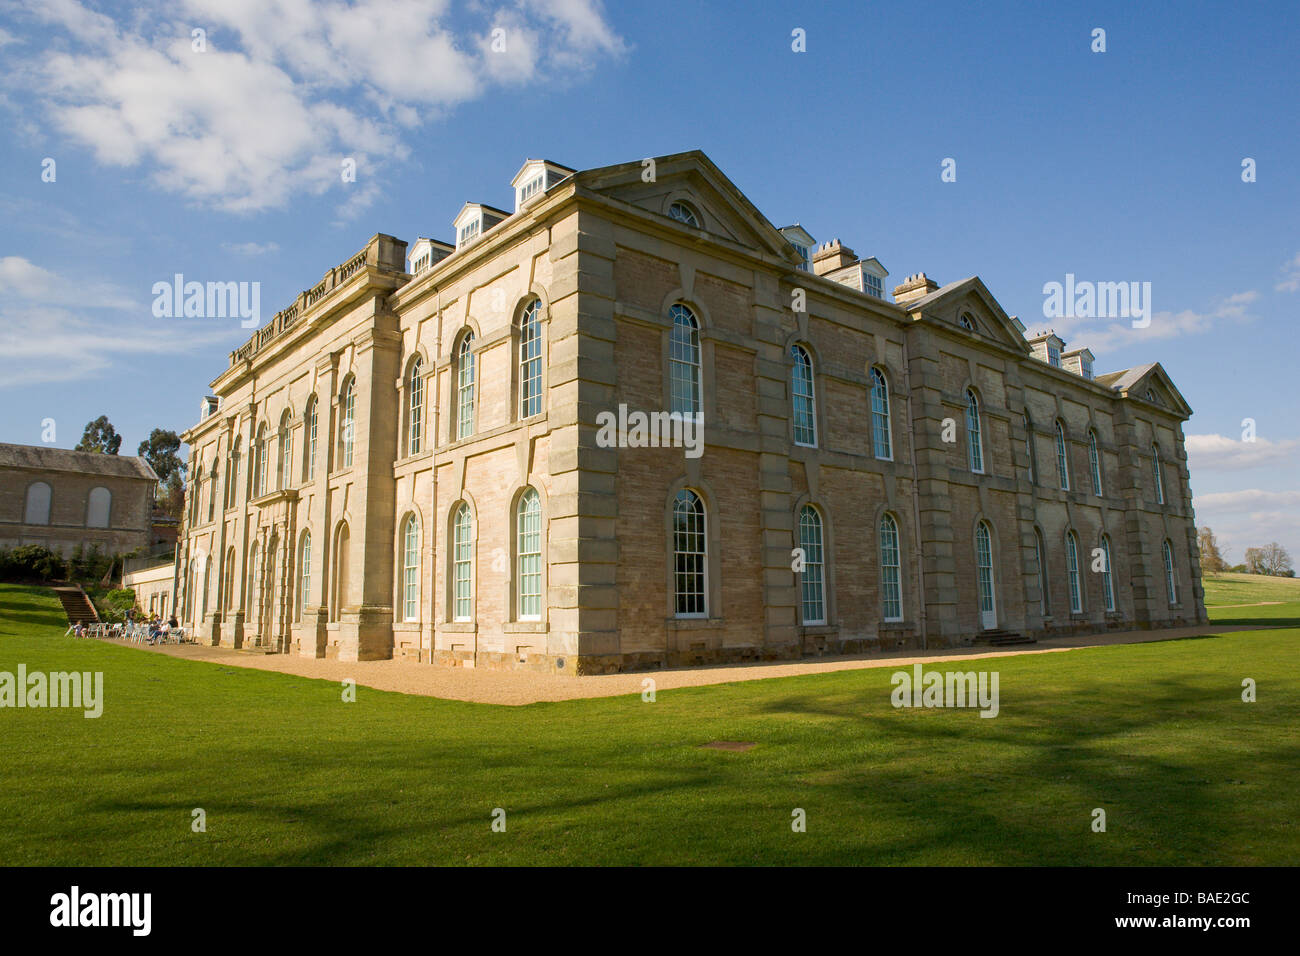 Compton Verney art gallery, Warwickshire. A Robert Adam designed grade 1 listed building set in 120 acres of parkland. Stock Photo